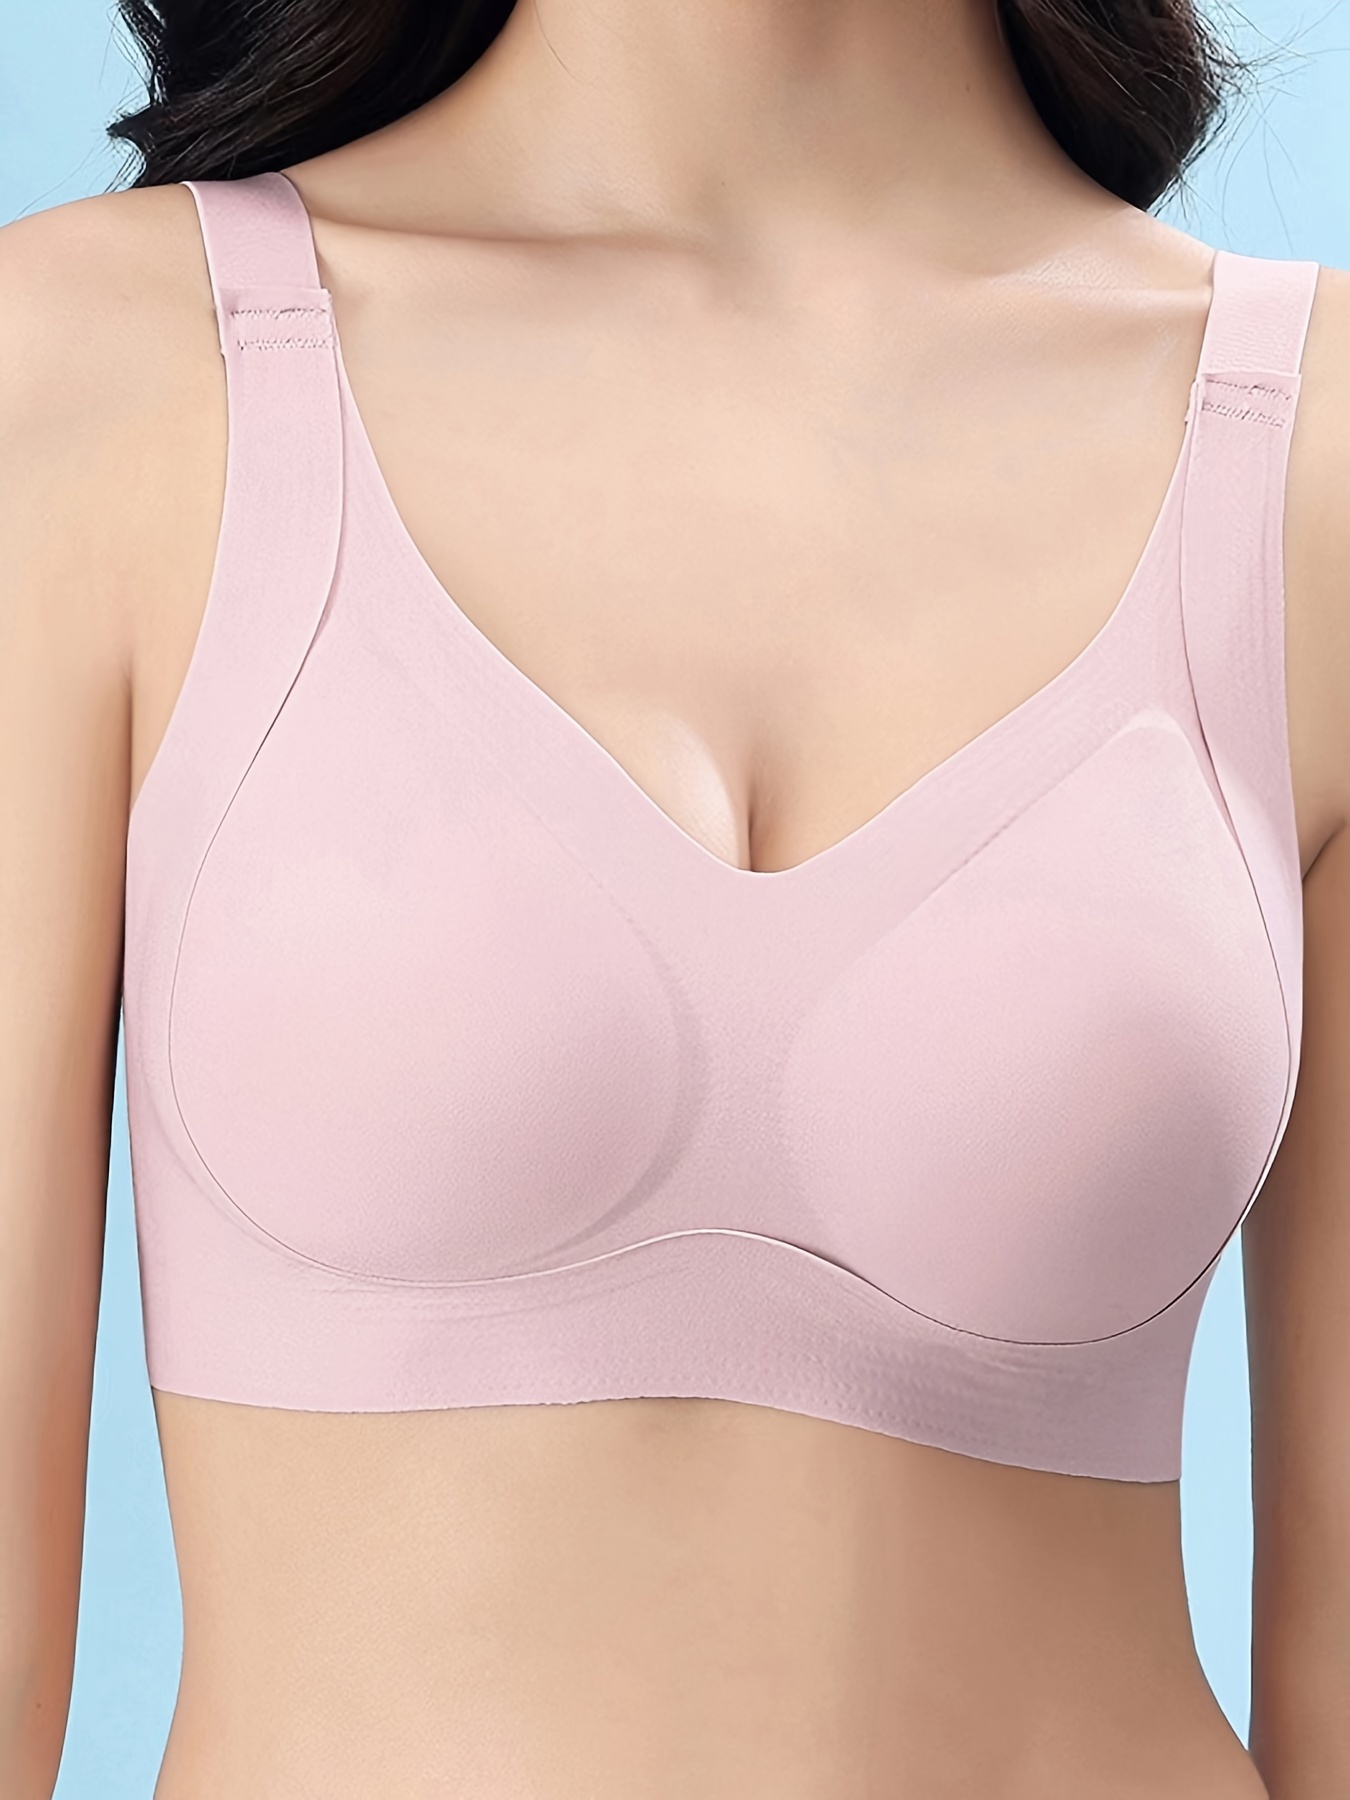 Soft Bras for Women with lightly lined Wireless Bras Breathable